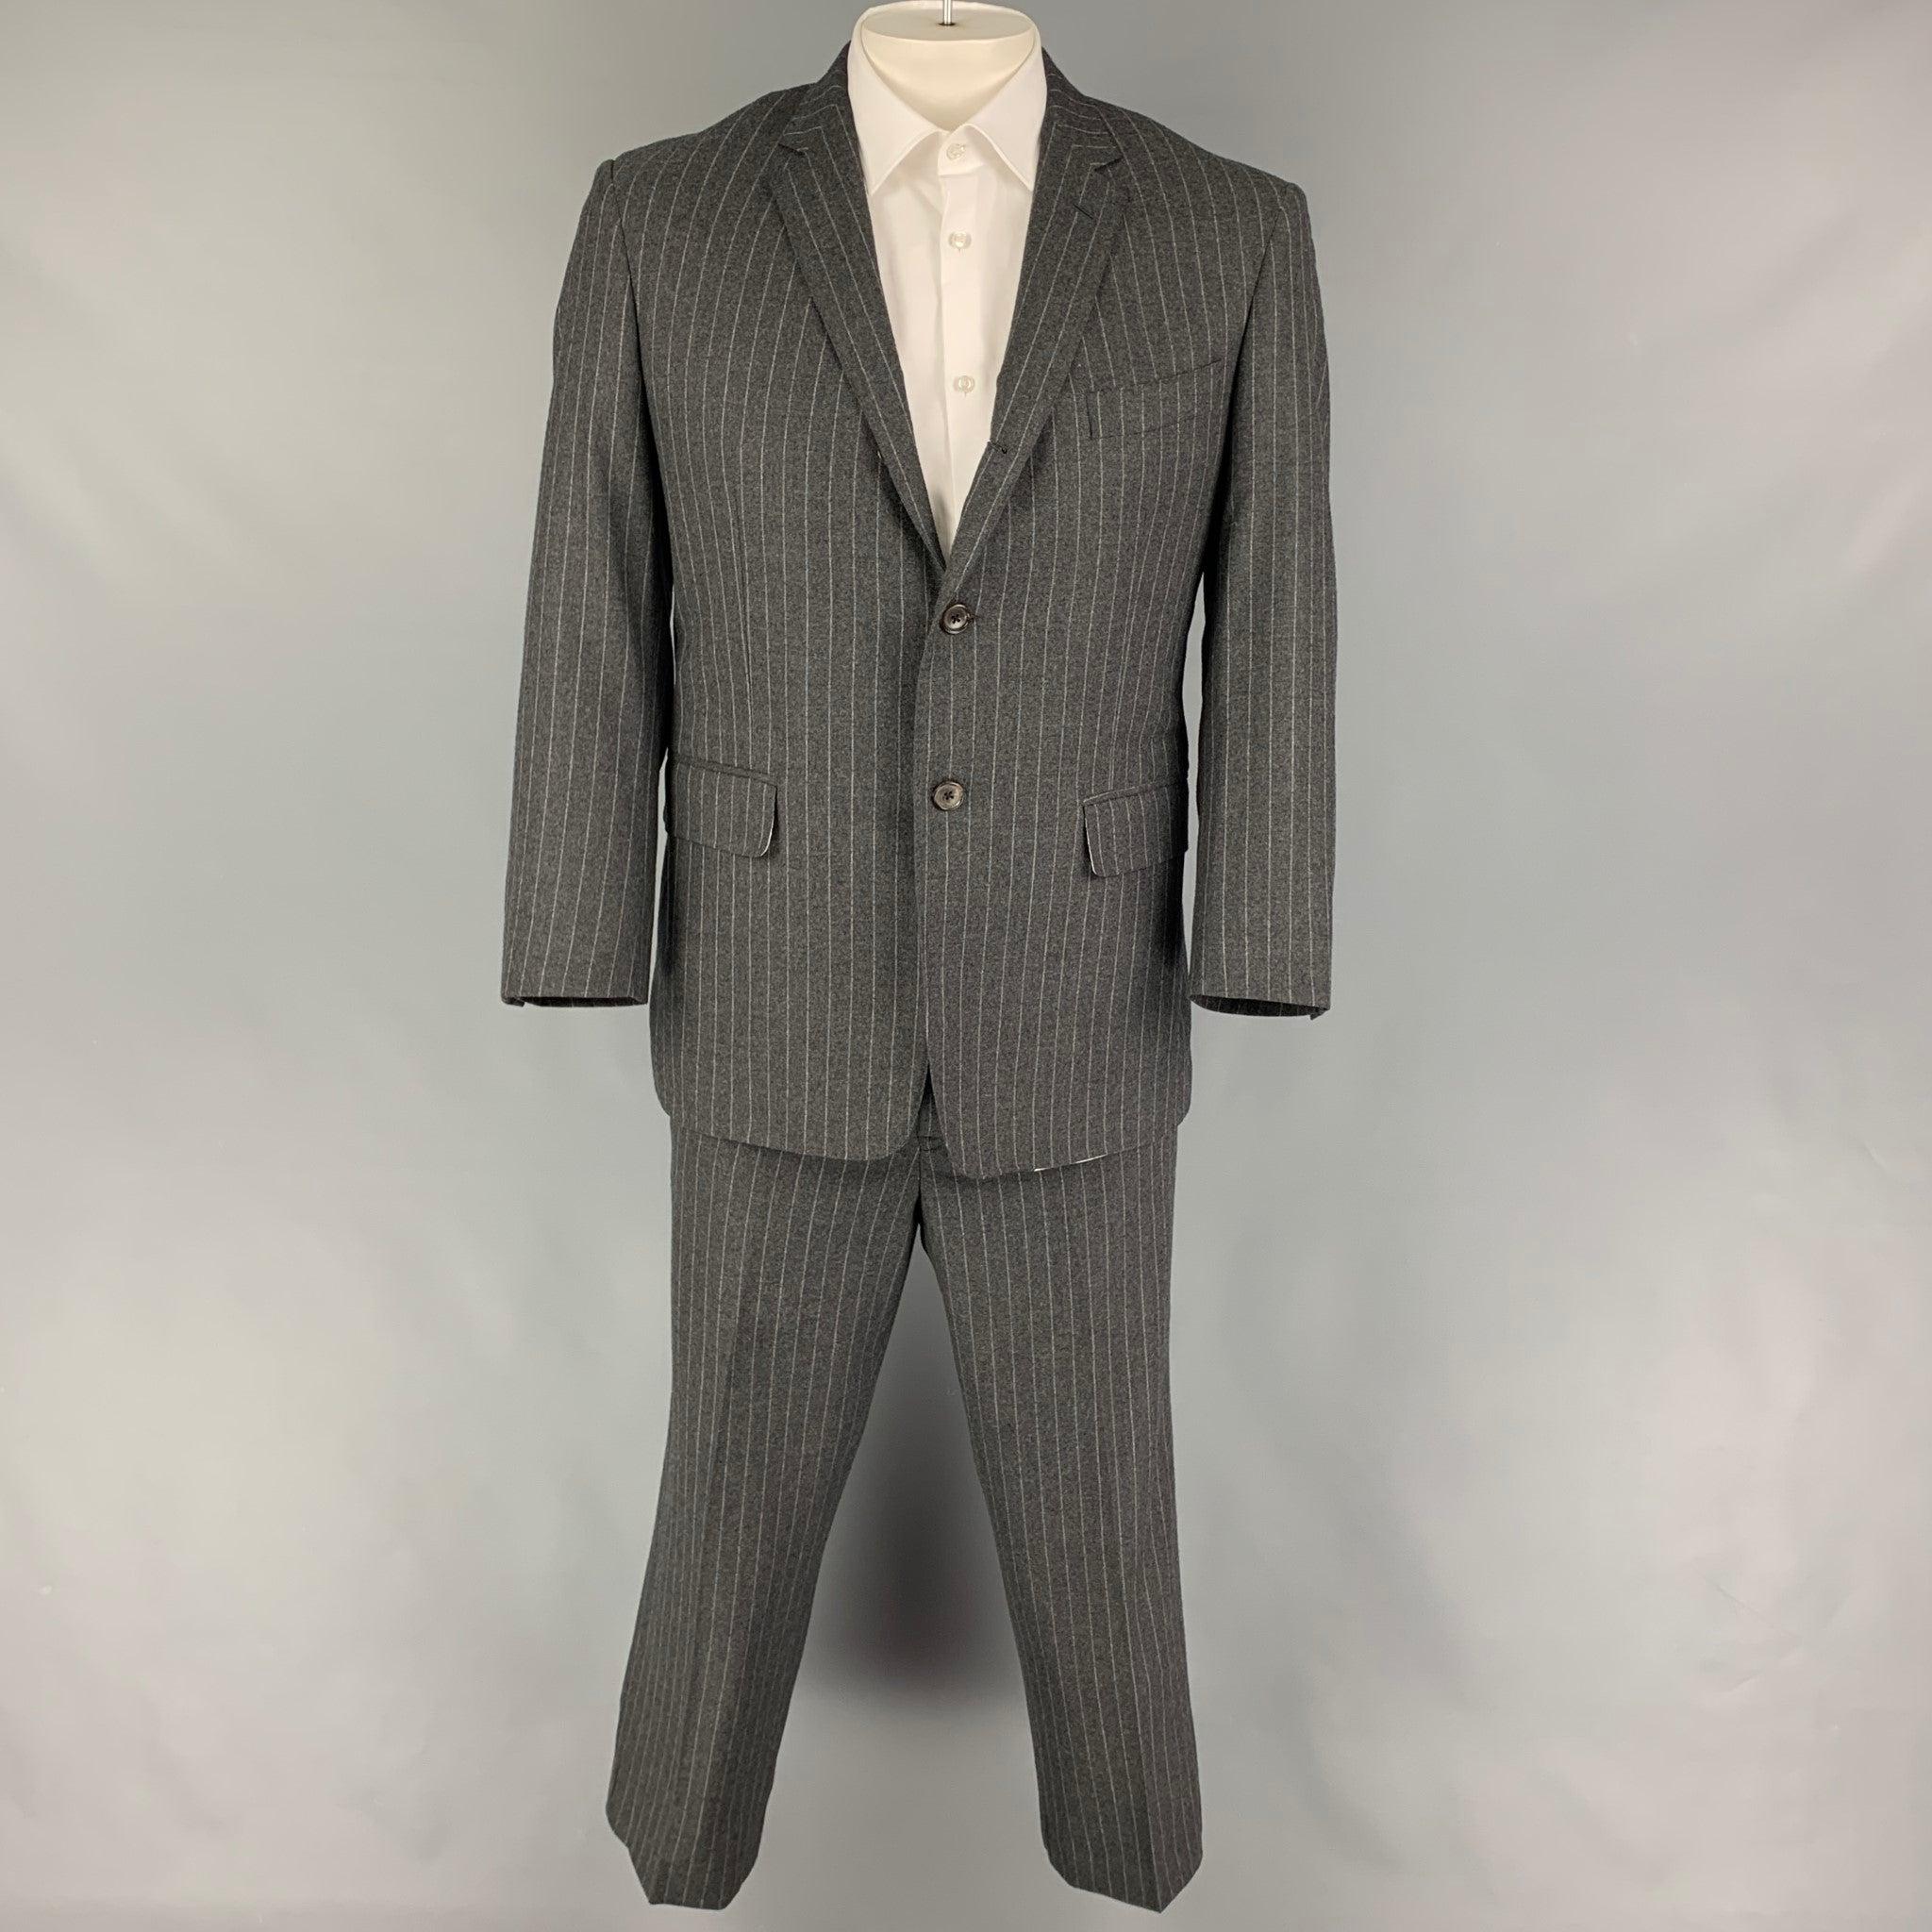 BLACK FLEECE
suit comes in a dark gray stripe wool and includes a single breasted, three button sport coat with a notch lapel and matching flat front trousers. Made in USA.Very Good Pre-Owned Condition. 

Marked:   42 

Measurements: 
 